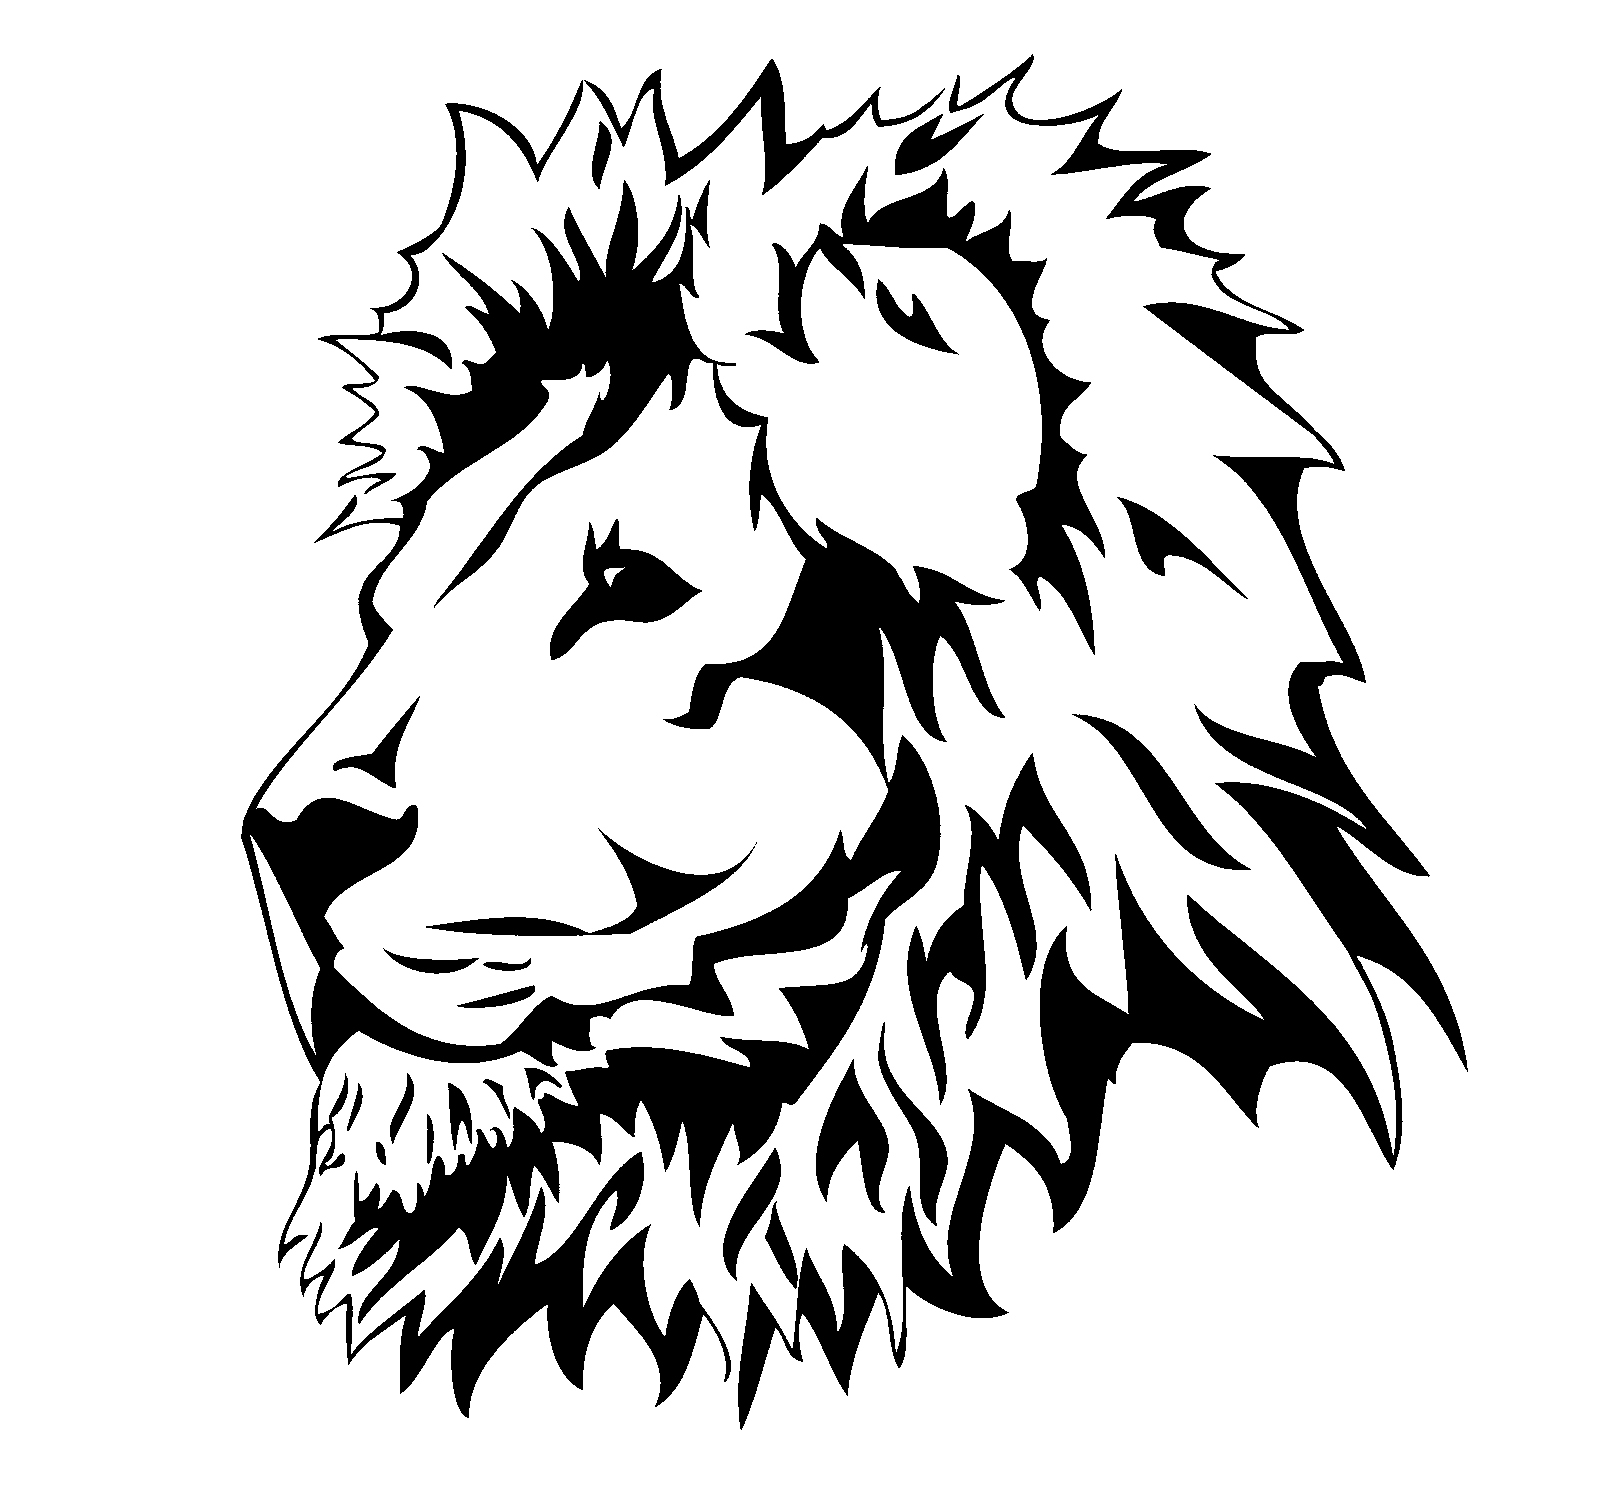 Drawings Of Lions Heads - ClipArt Best